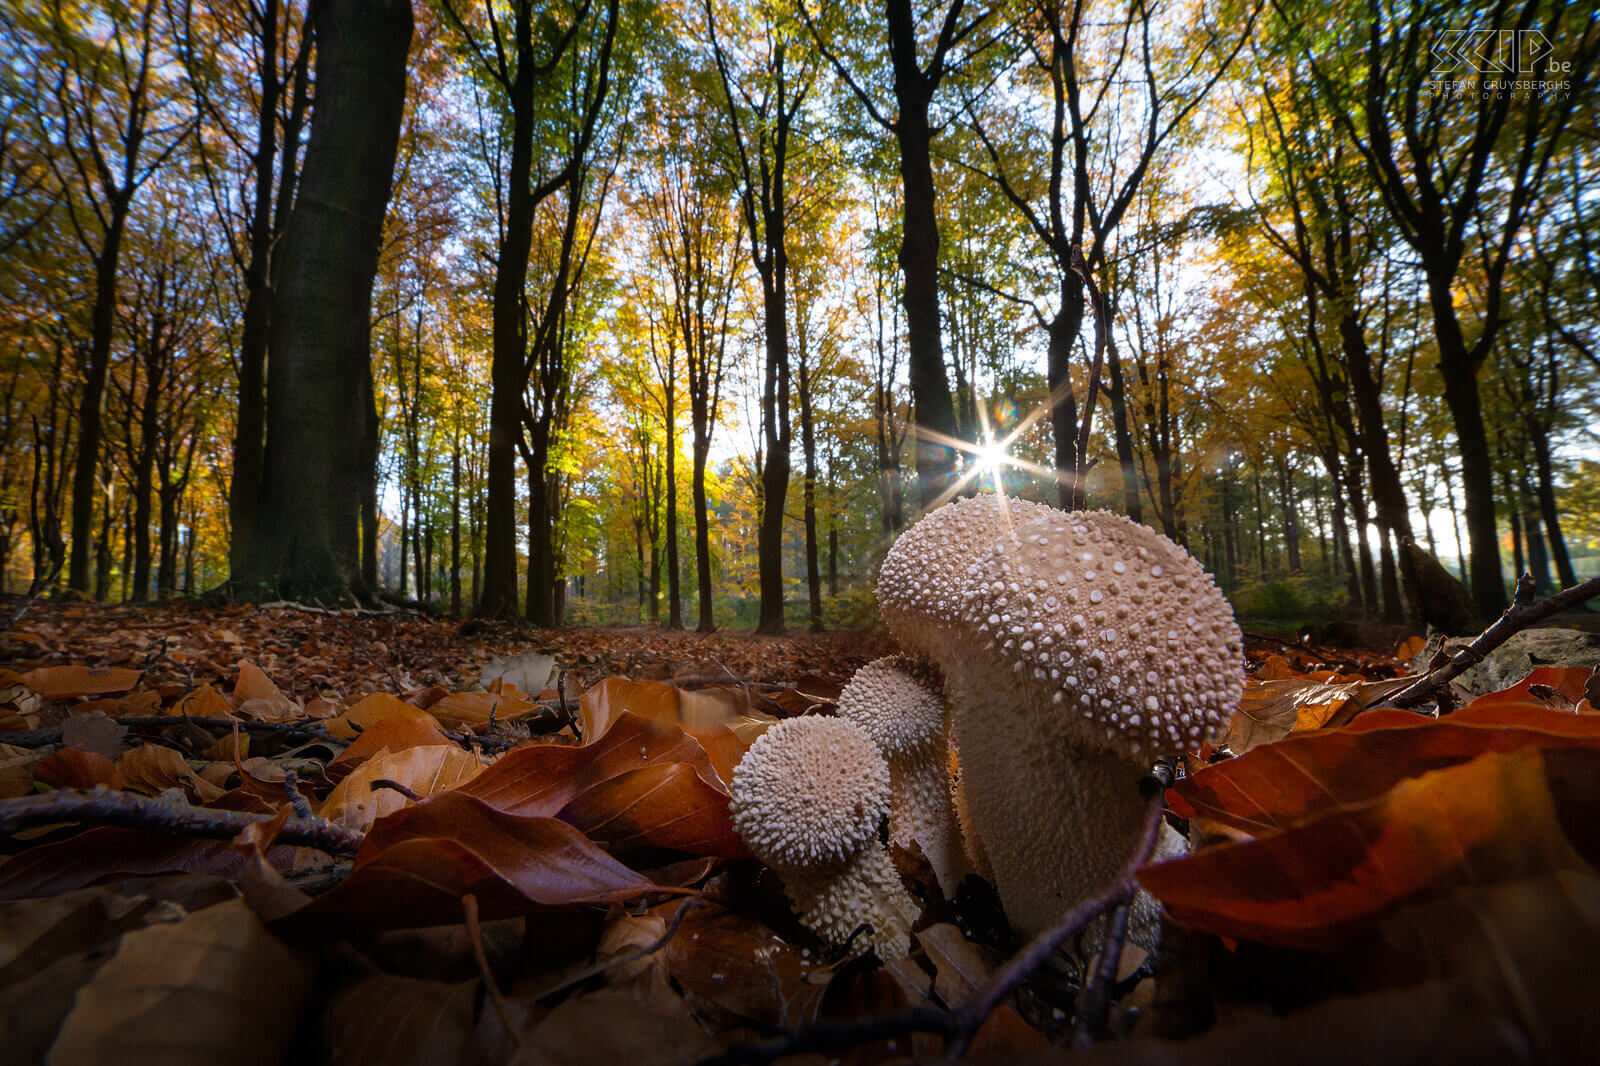 Mushrooms - Common puffball This autumn many beautiful mushrooms and fungi appear again in our forests and gardens Stefan Cruysberghs